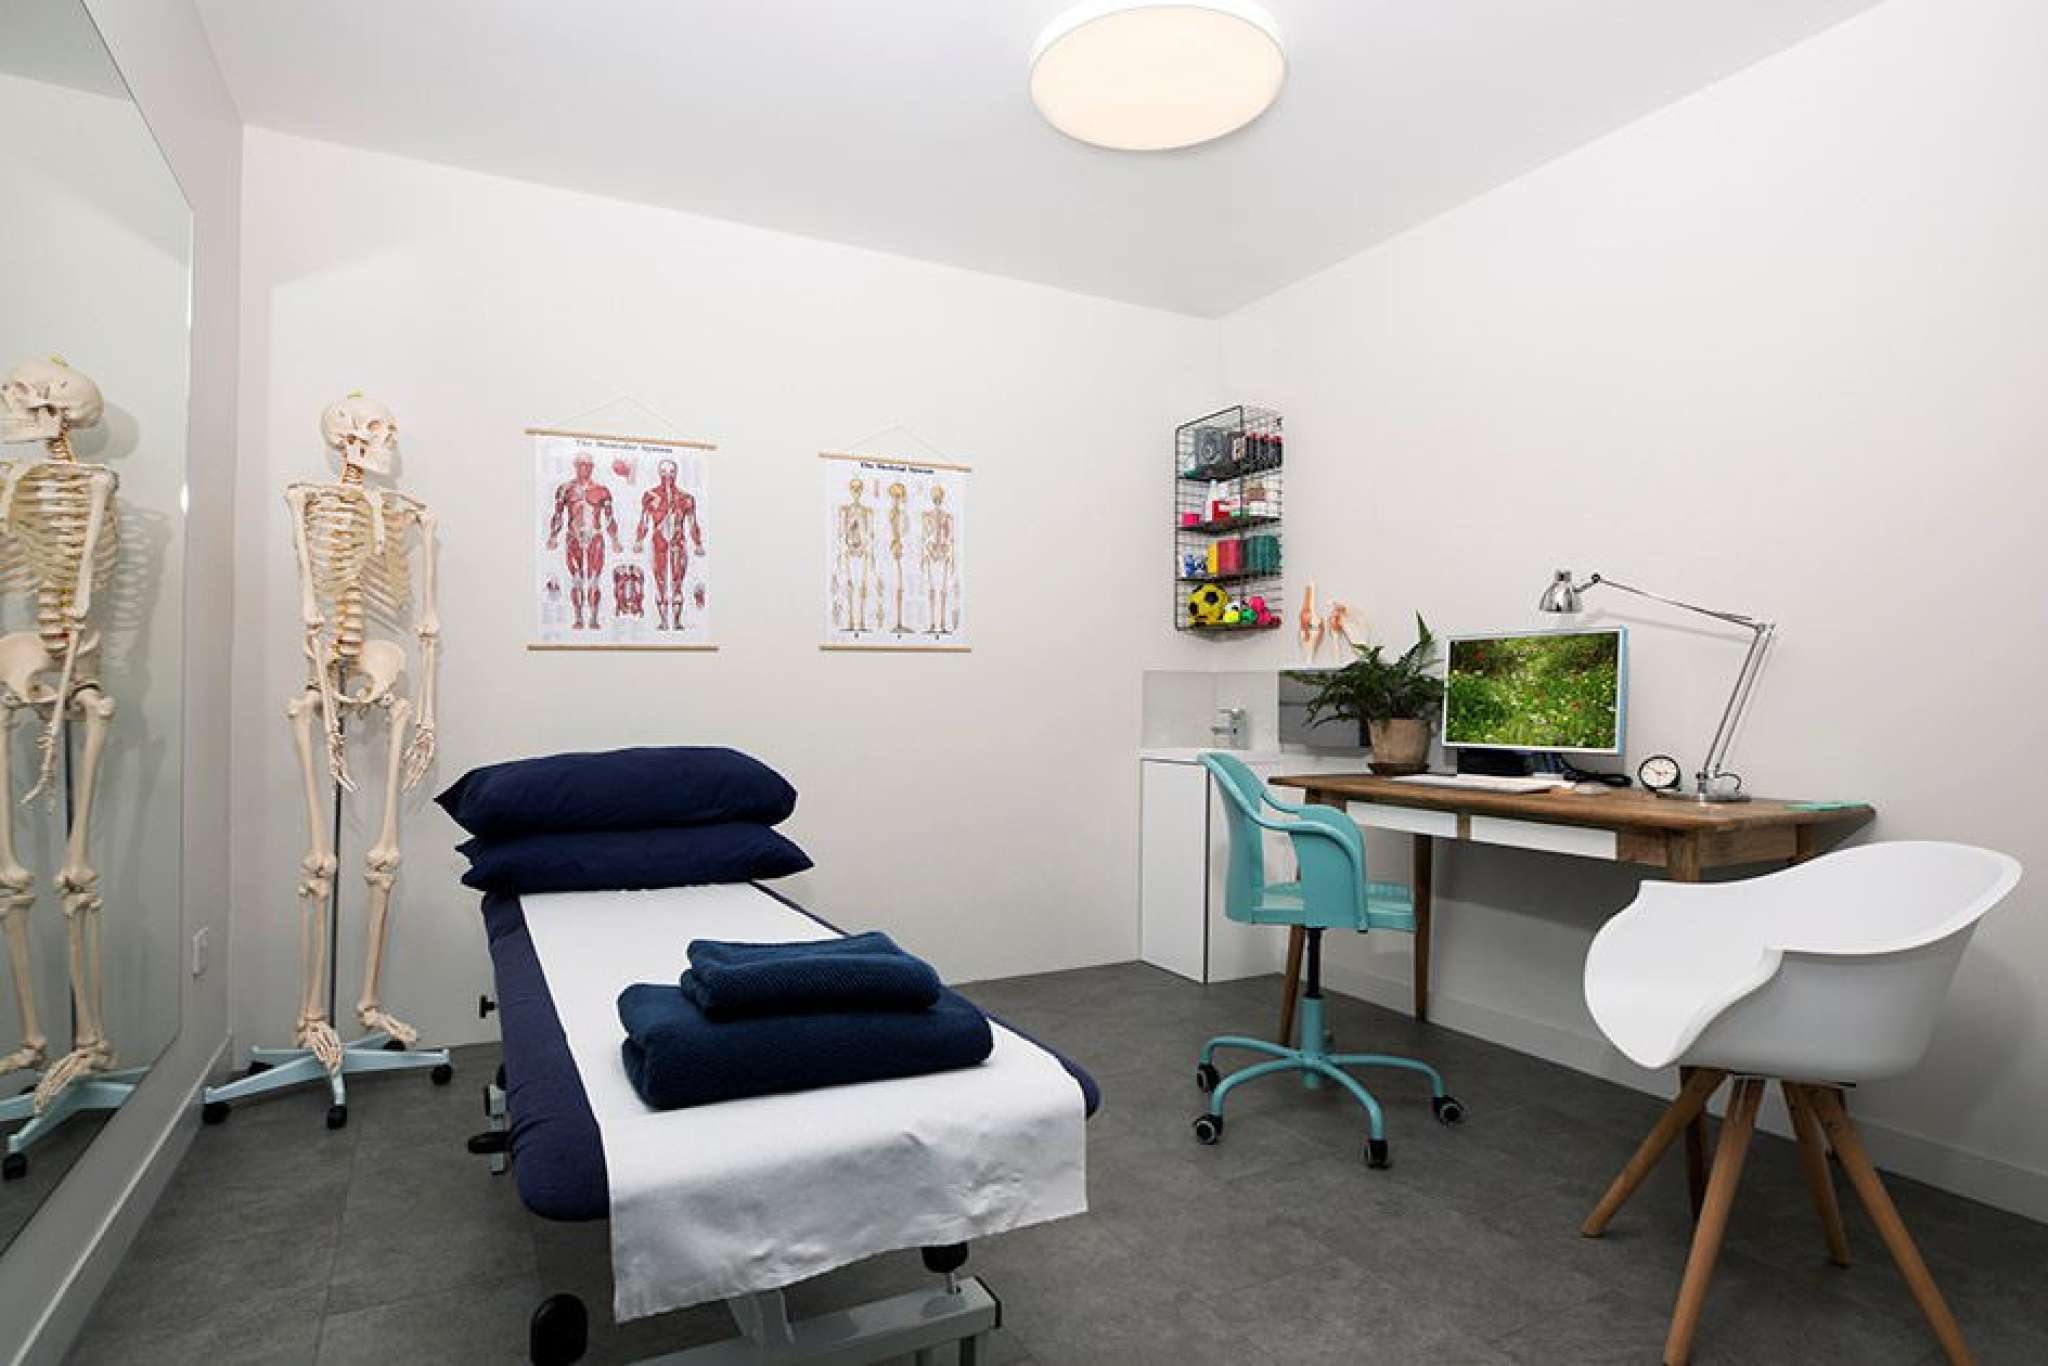 The-ultra-sports-clinic-room.